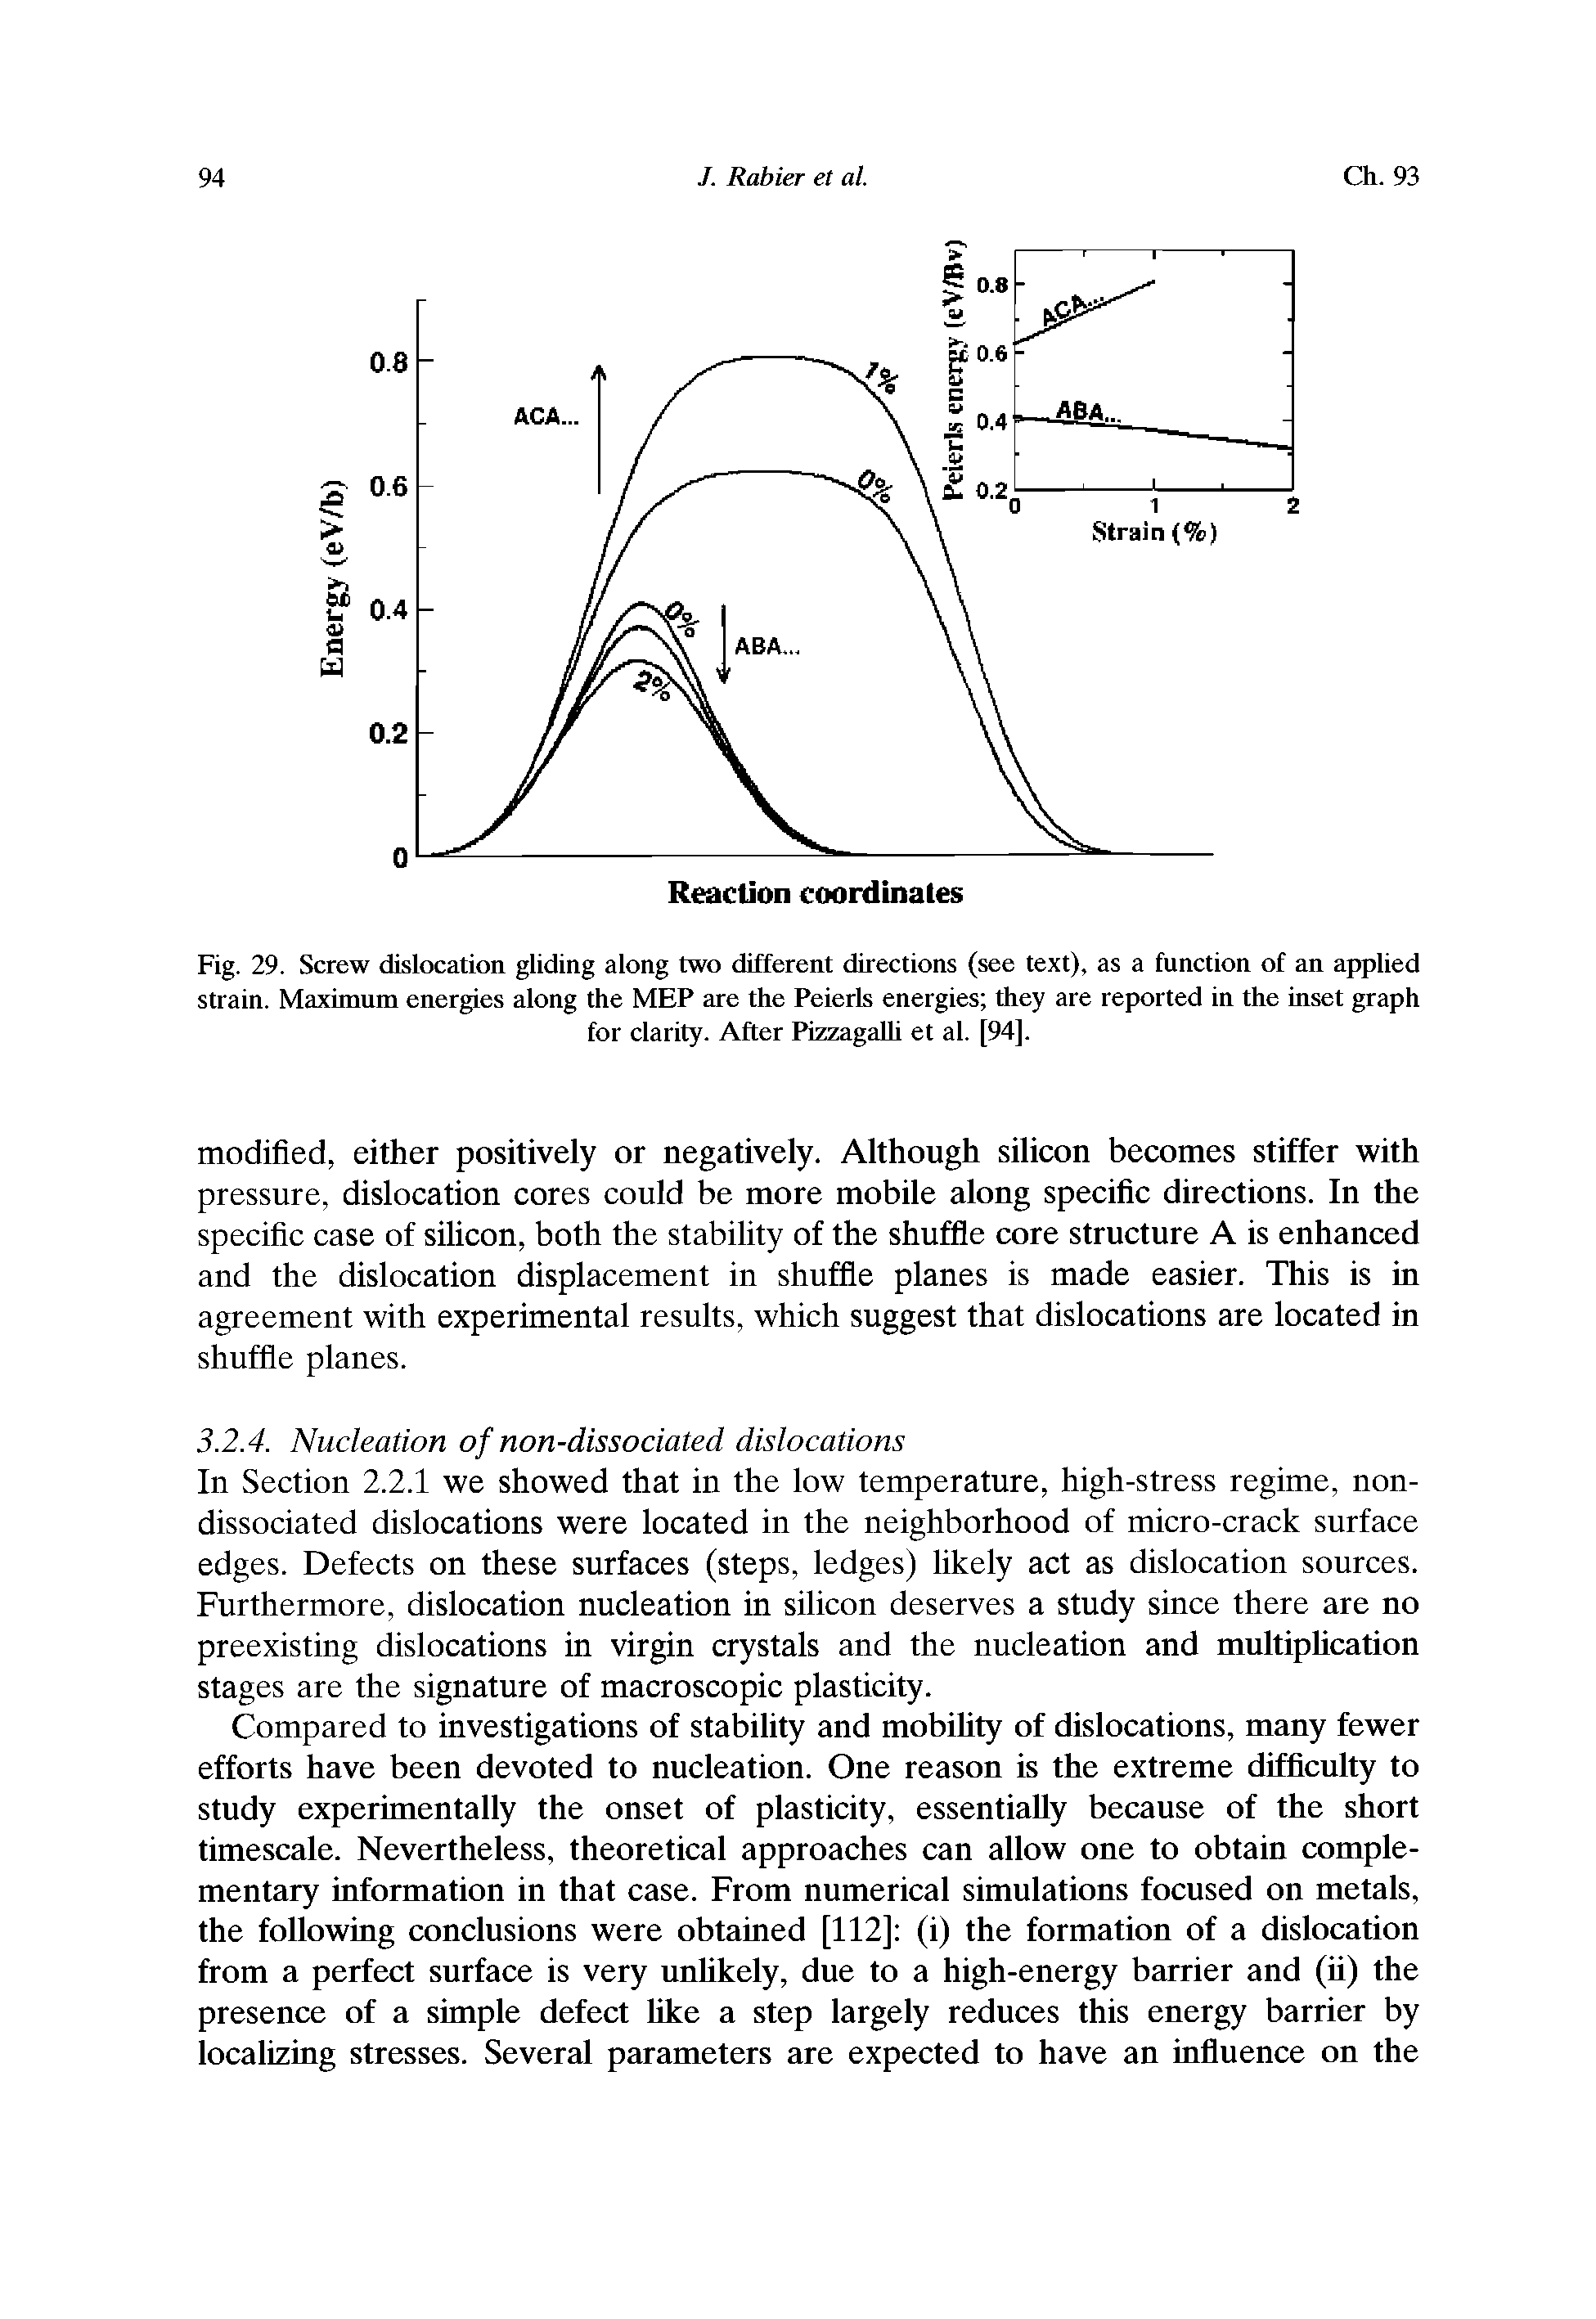 Fig. 29. Screw dislocation gliding along two different directions (see text), as a function of an applied strain. Maximum energies along the MEP are the Peierls energies they are reported in the inset graph...